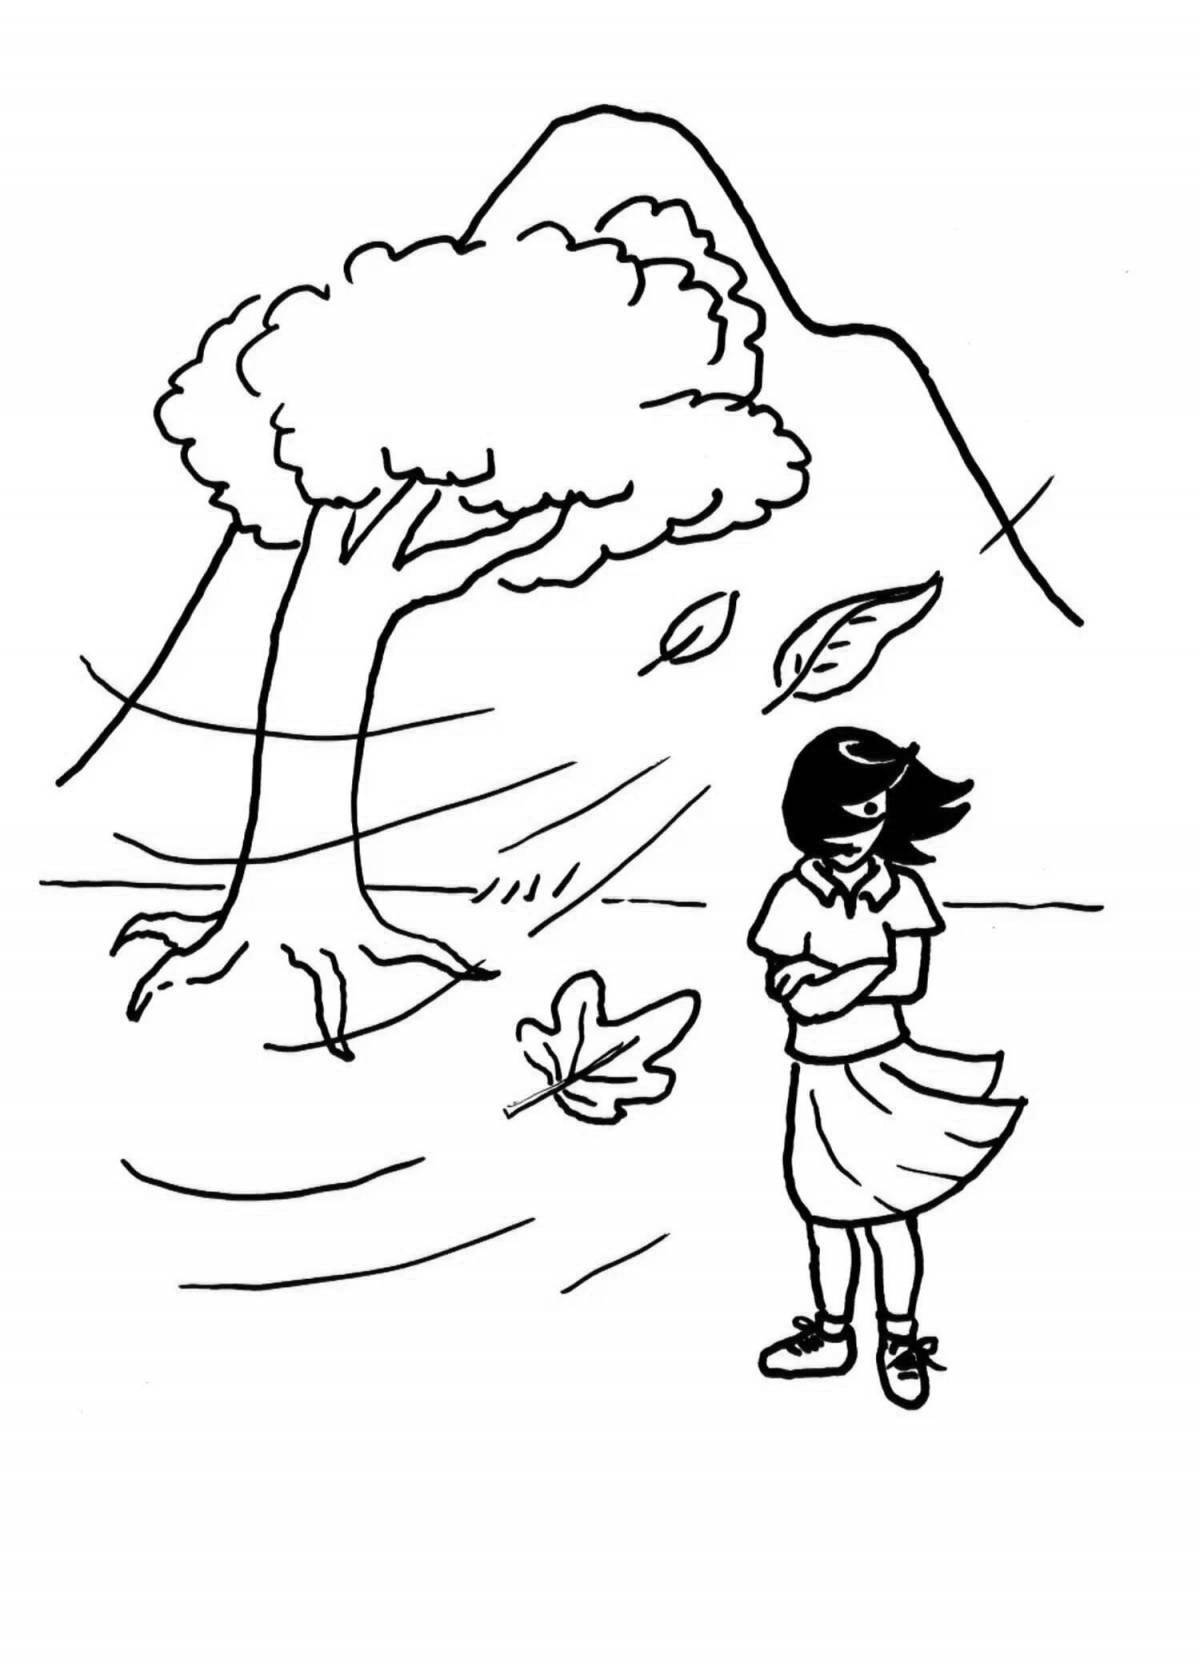 Coloring page windy whirlwind